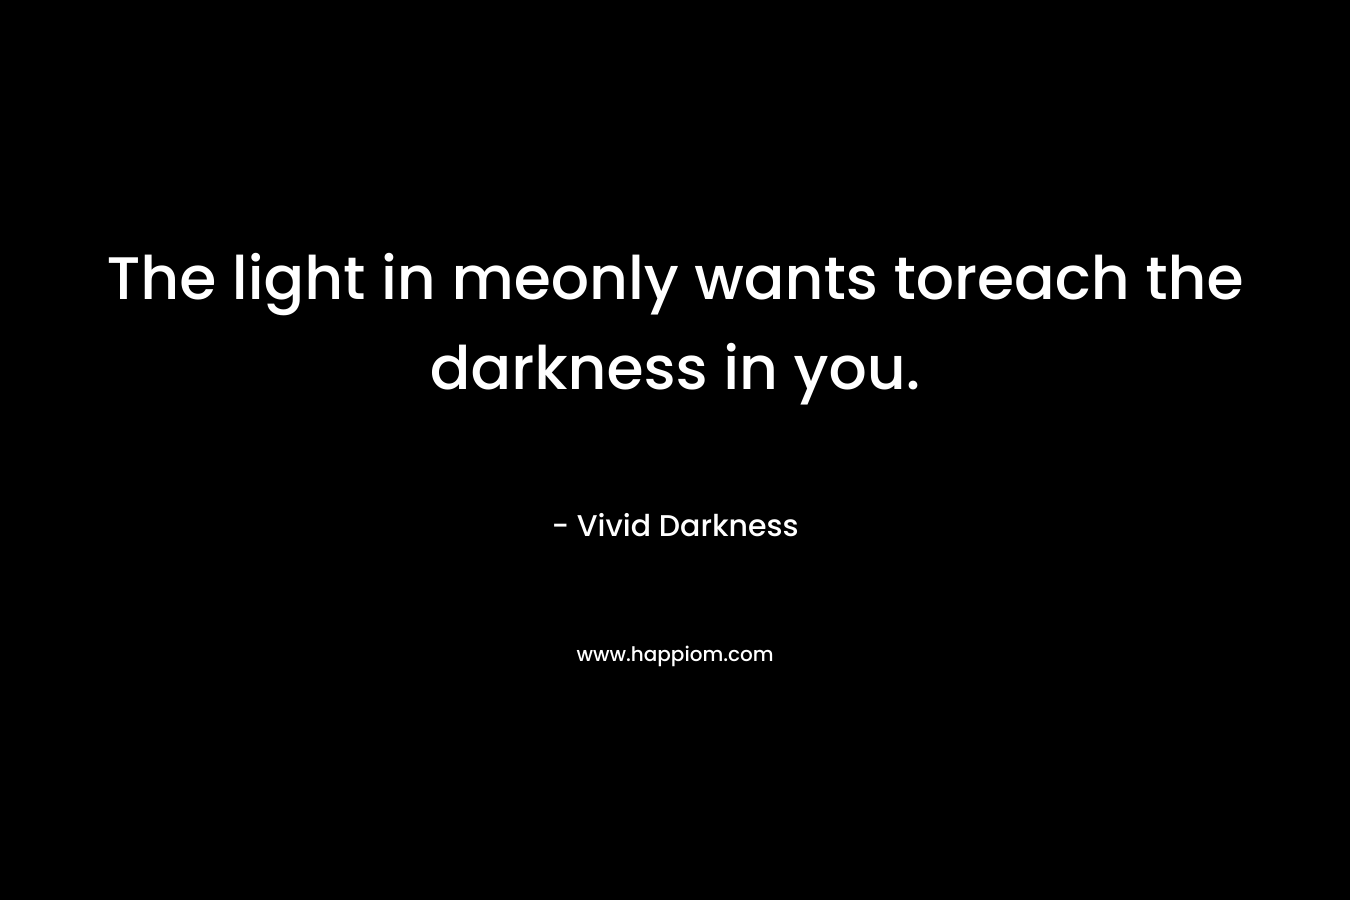 The light in meonly wants toreach the darkness in you.